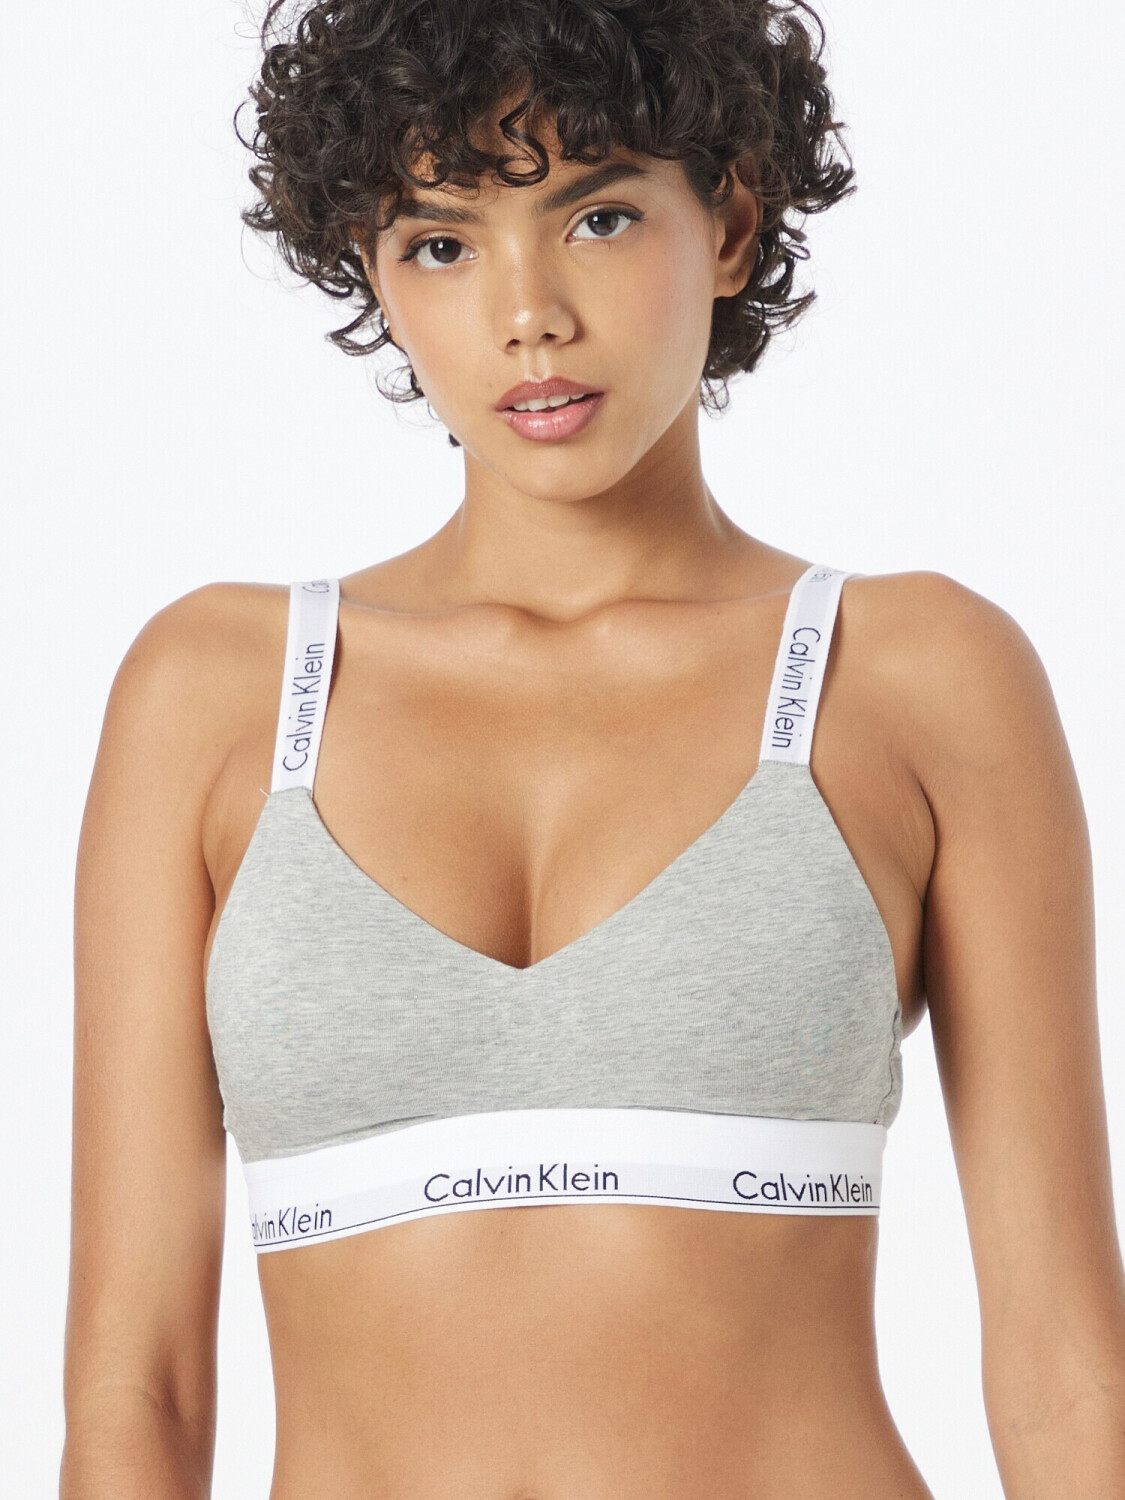 Calvin Klein Small Lightly Lined Logo Bralette QP16680-020 Grey Heather New  $26